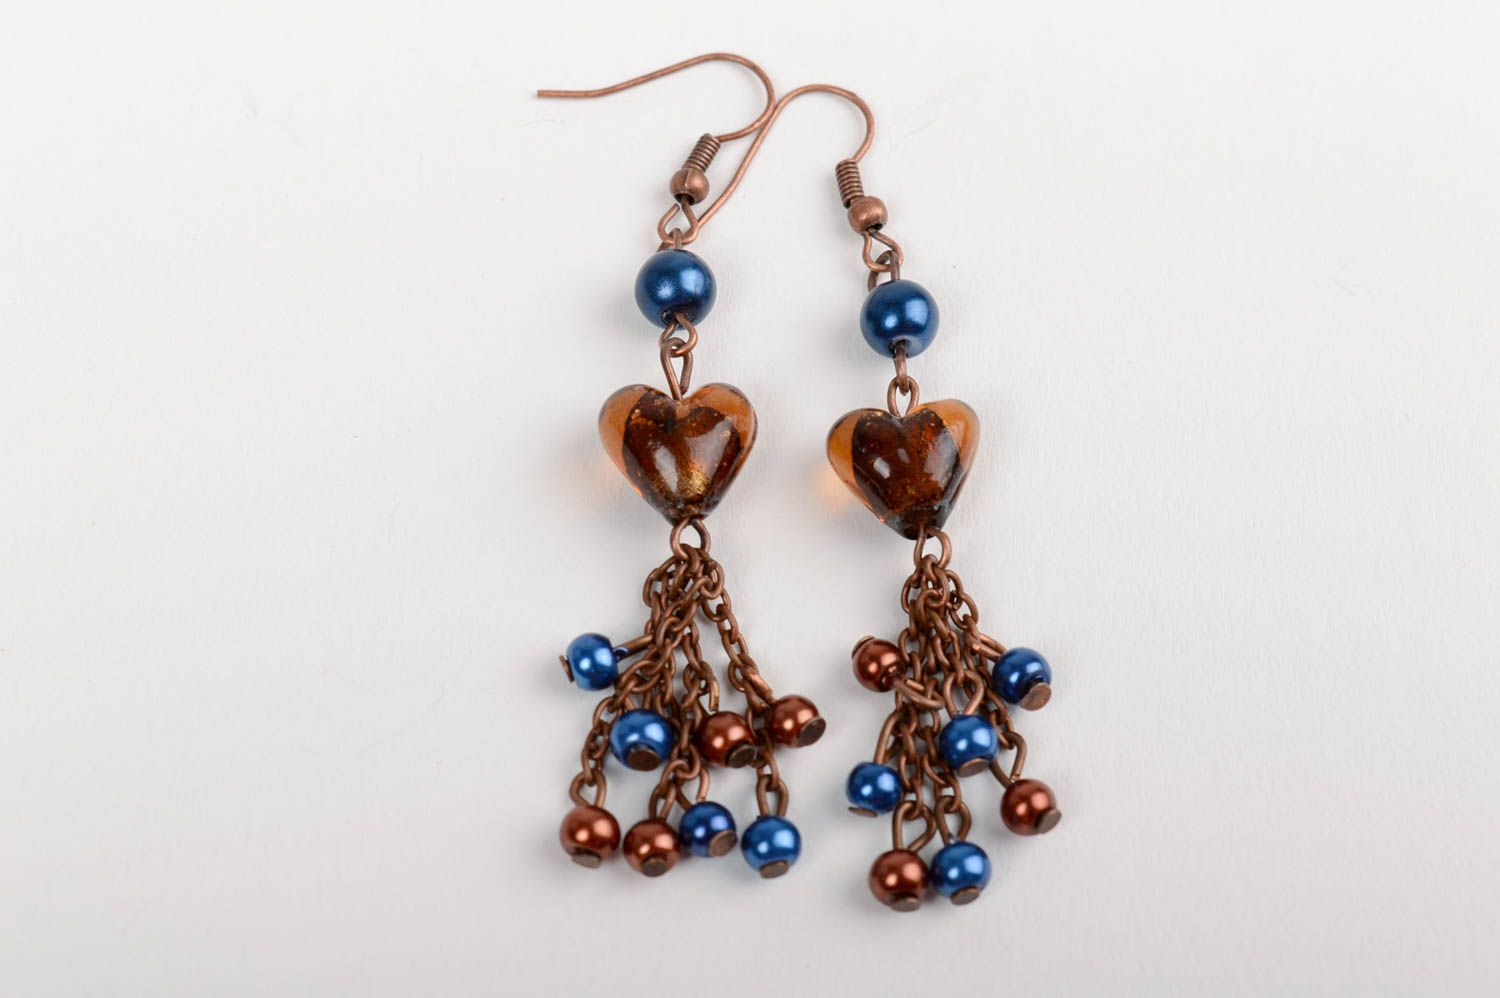 Handmade earrings with Venetian glass beads and ceramics pearls on metal chains photo 5